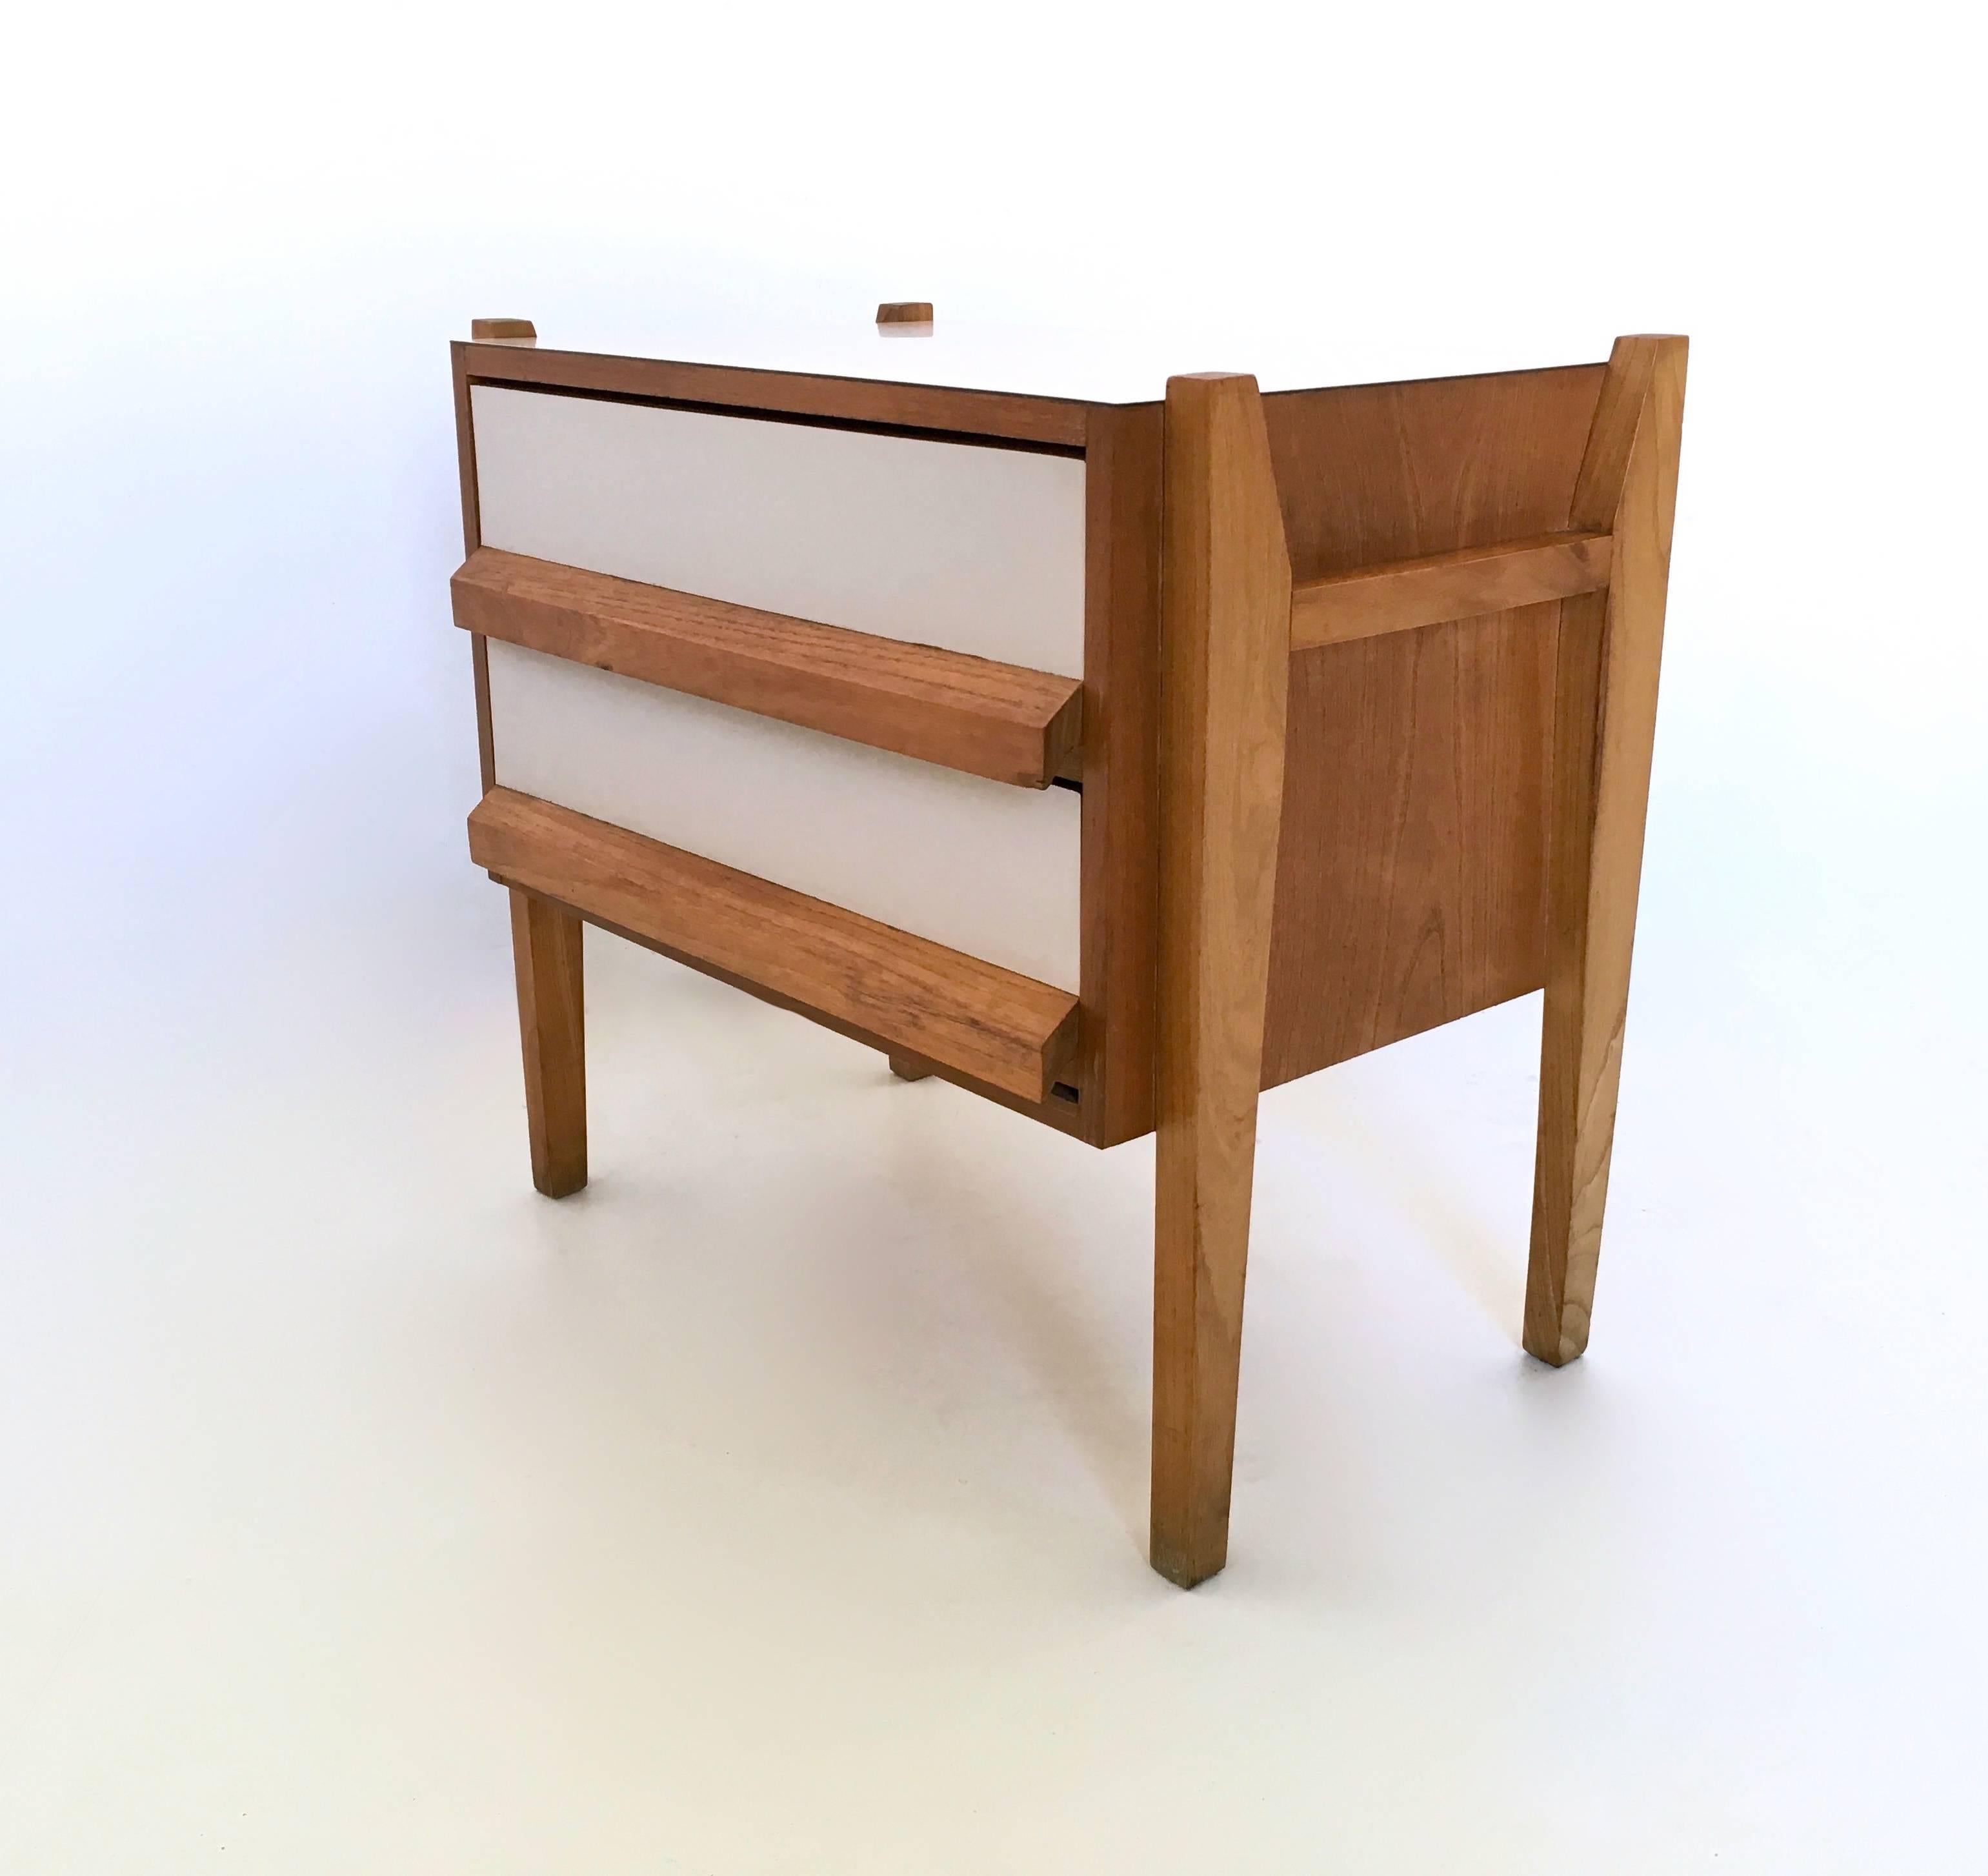 Mid-20th Century Italian Oak and Formica Bedside Tables, 1950s